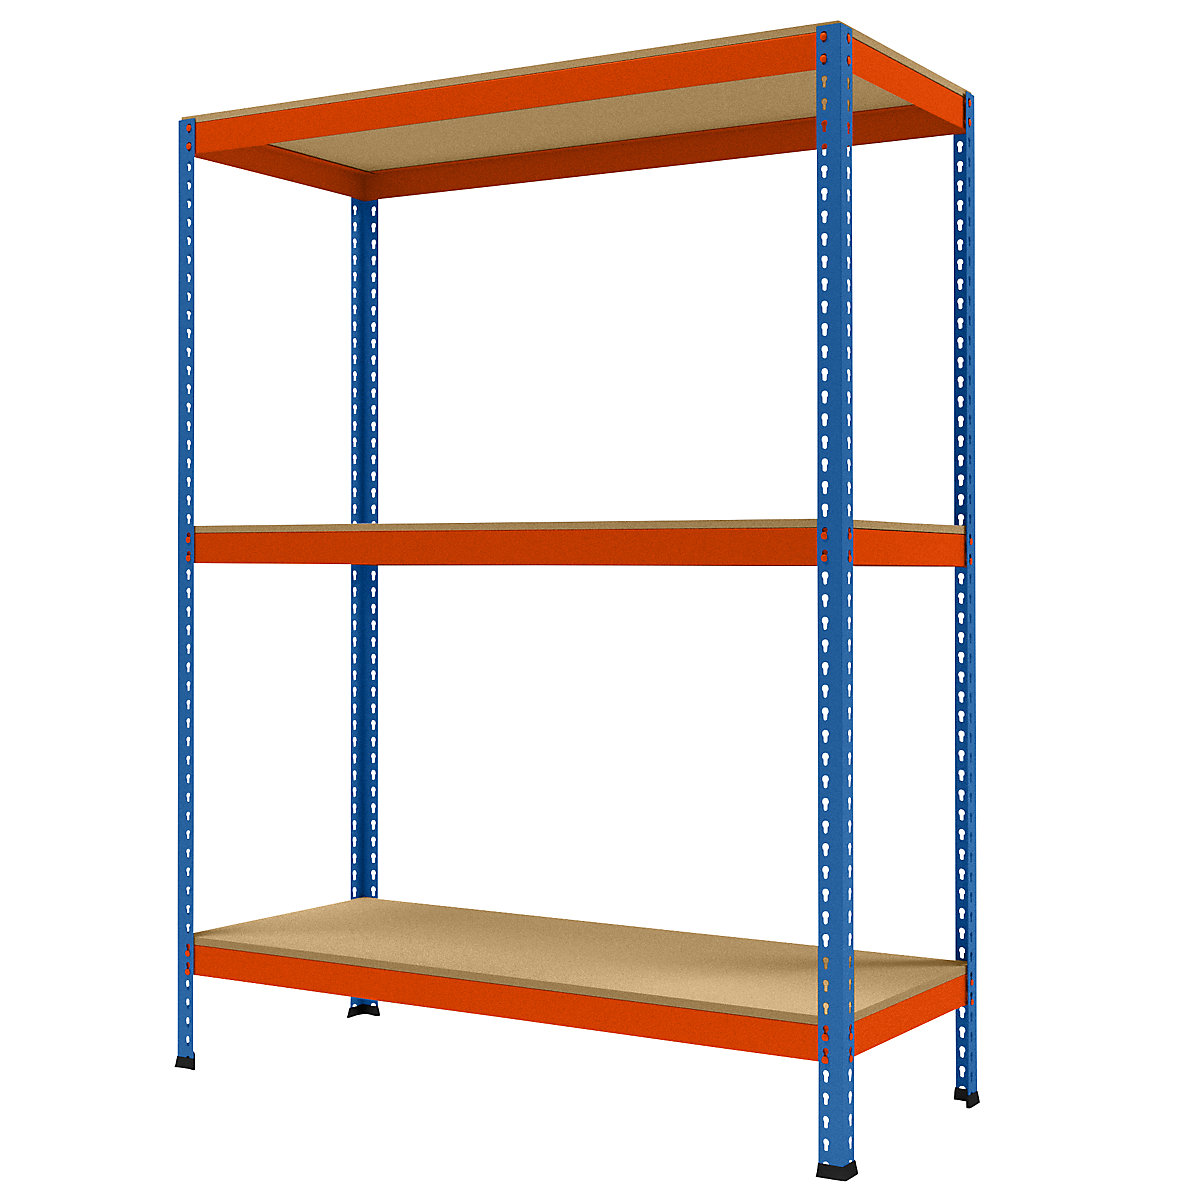 Wide span heavy duty shelving, height 1981 mm, overall depth 621 mm, width 1536 mm